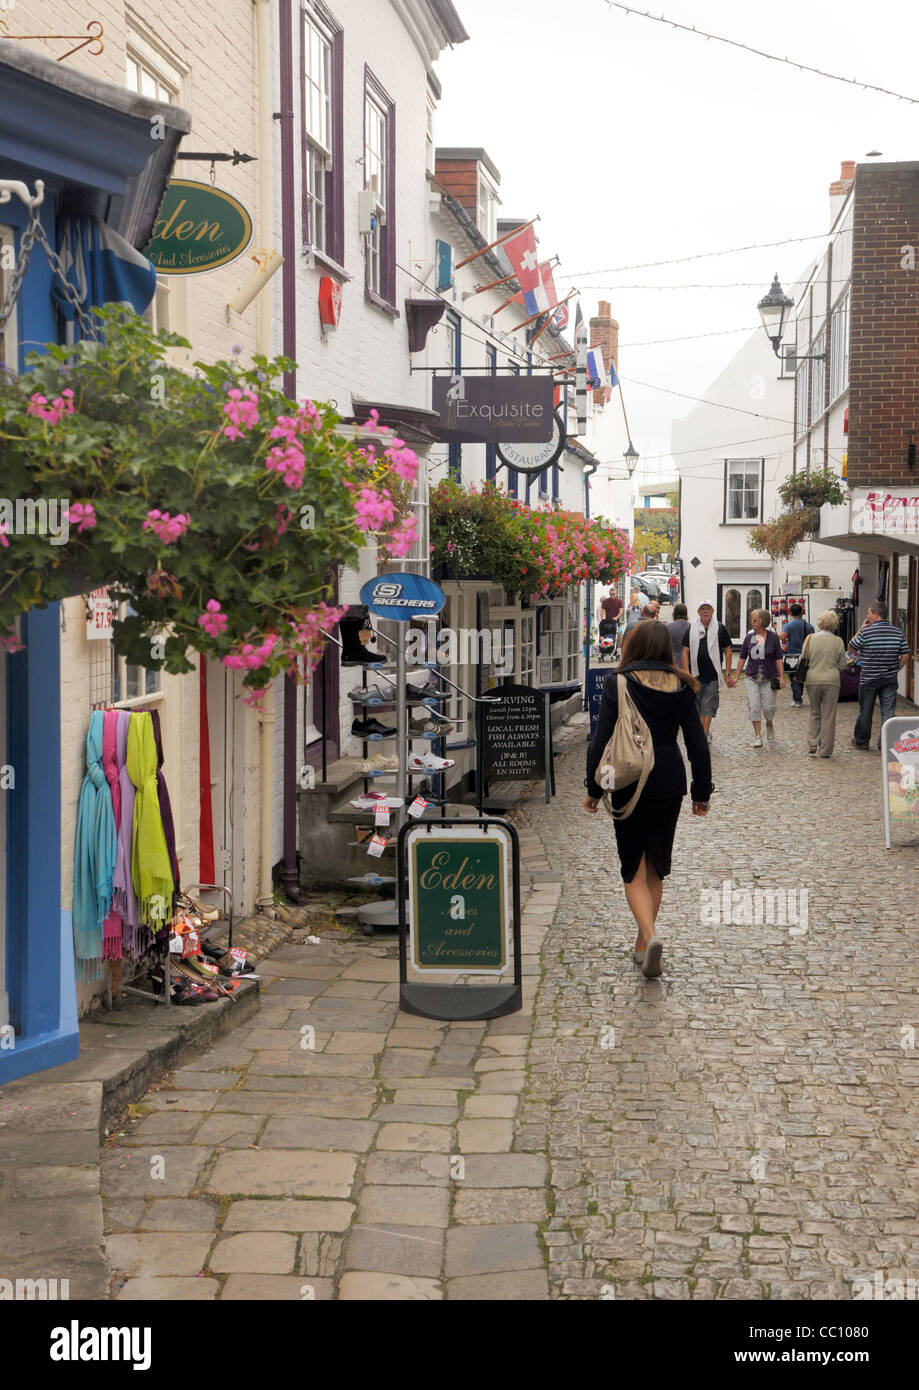 The shops and quaint cobbled streets of an English town. Yarmouth, Hampshire, England Stock Photo